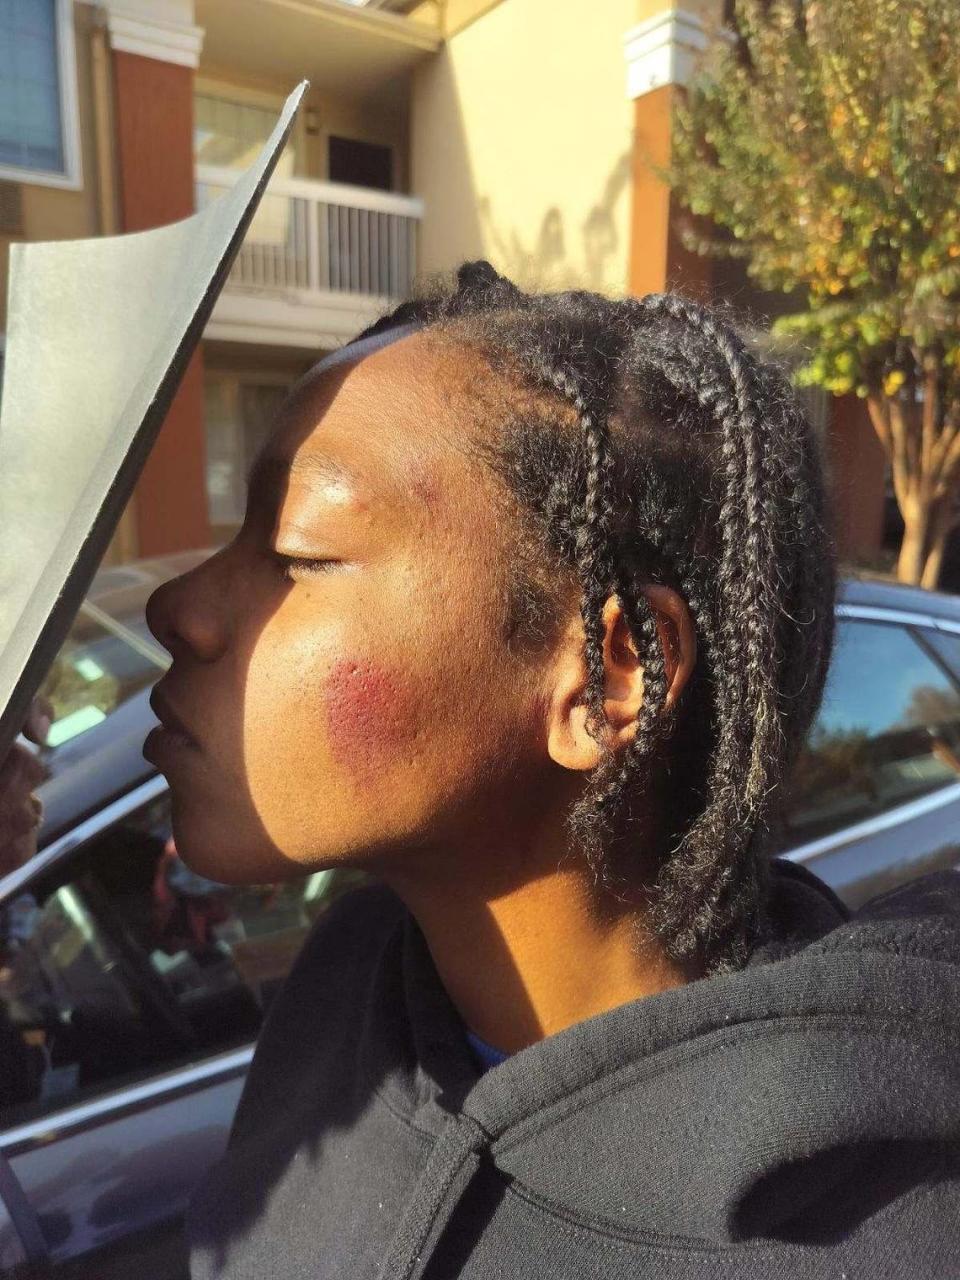 A photo provided by Team Trublue founder Will Adams shows marks on one side of Christina Pierre’s face. An officer struck her in the face, police confirmed Thursday.